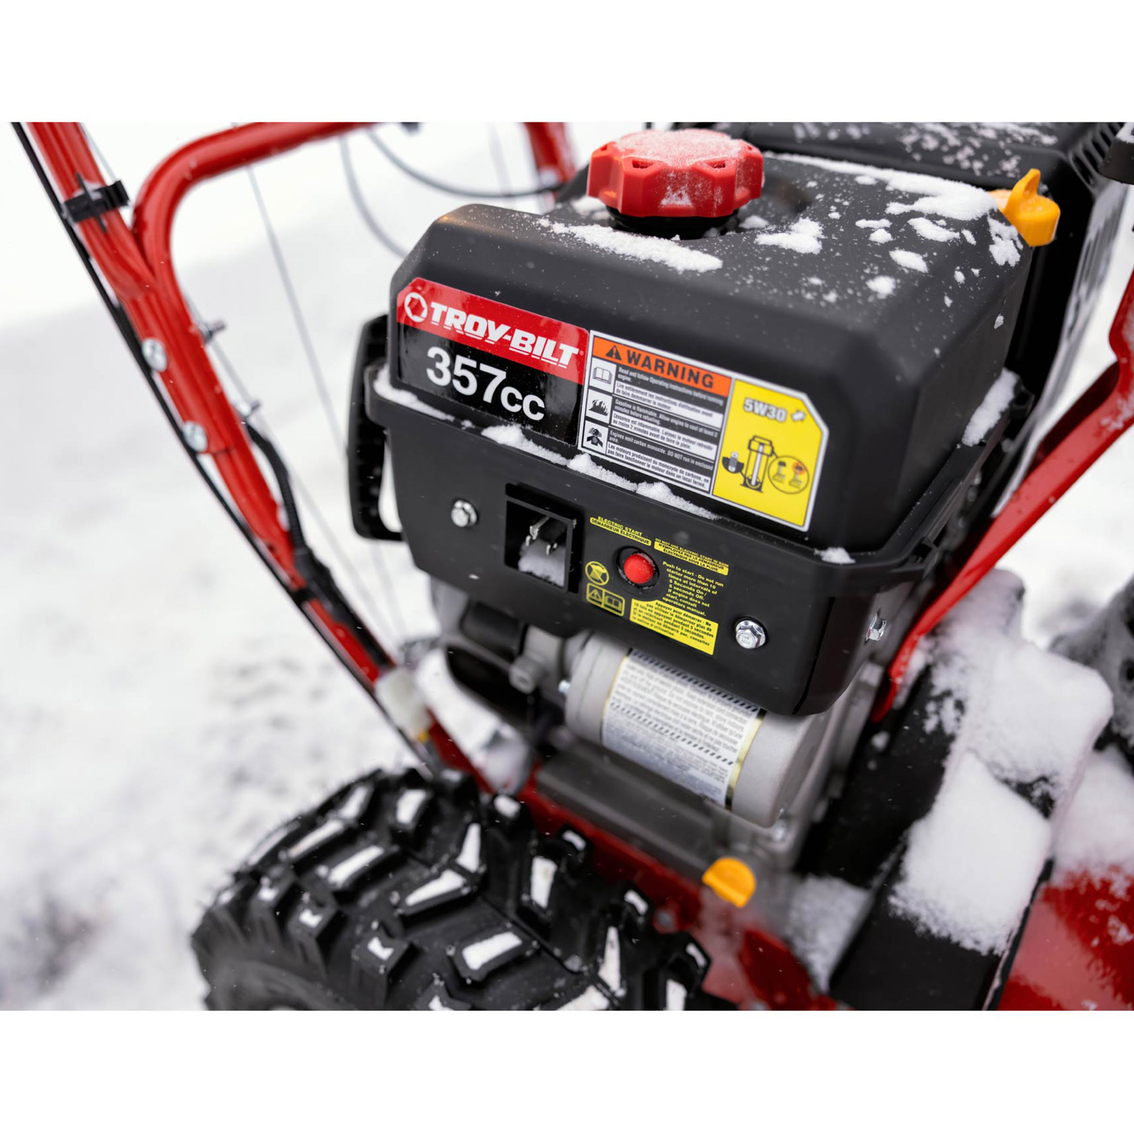 Troy-Bilt Storm 3090 2 Stage 30 in. Snowthrower - Image 7 of 8